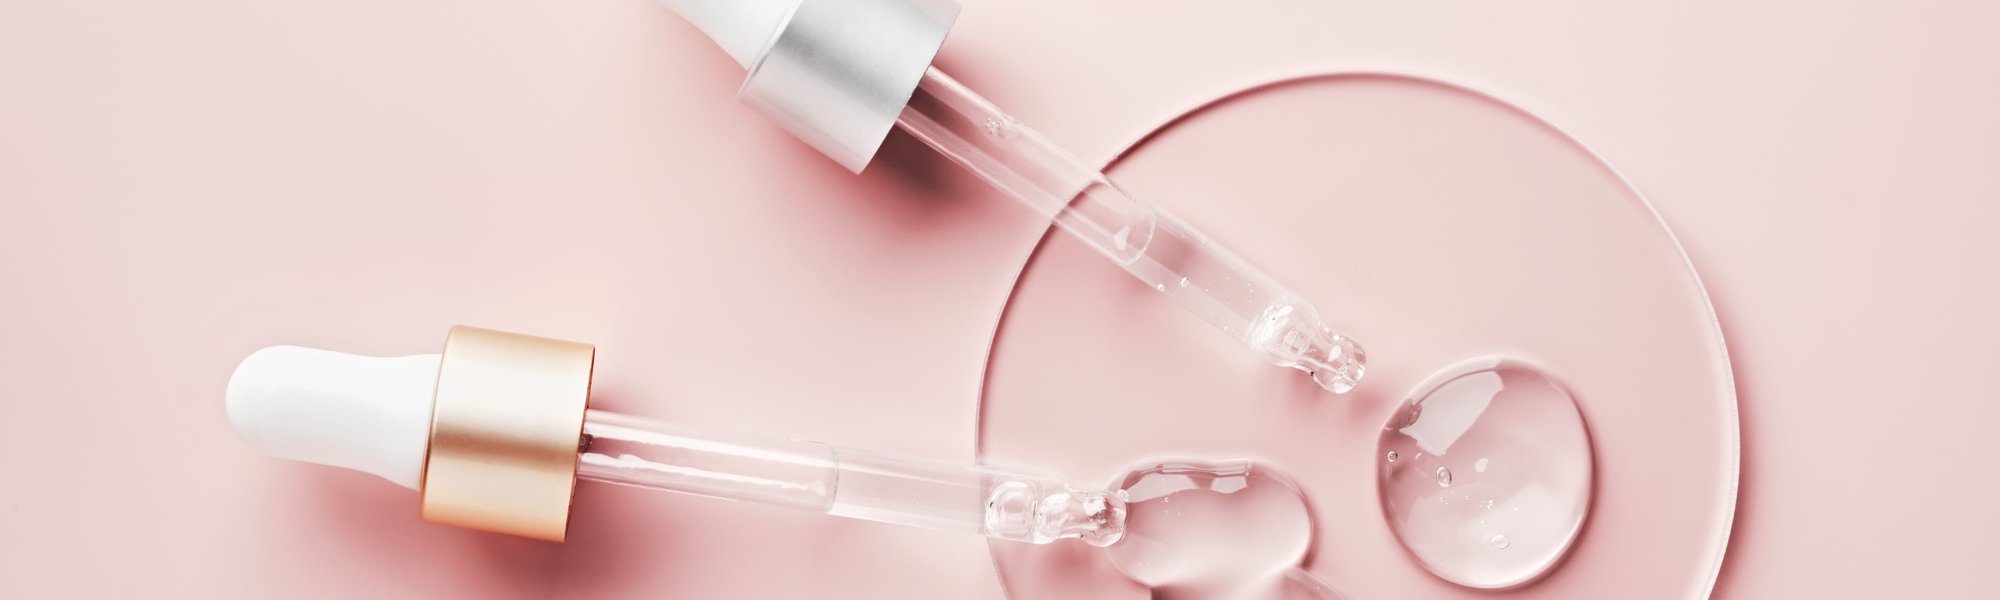 hyaluronic acid vs glycolic acid, difference between hyaluronic acid and glycolic acid